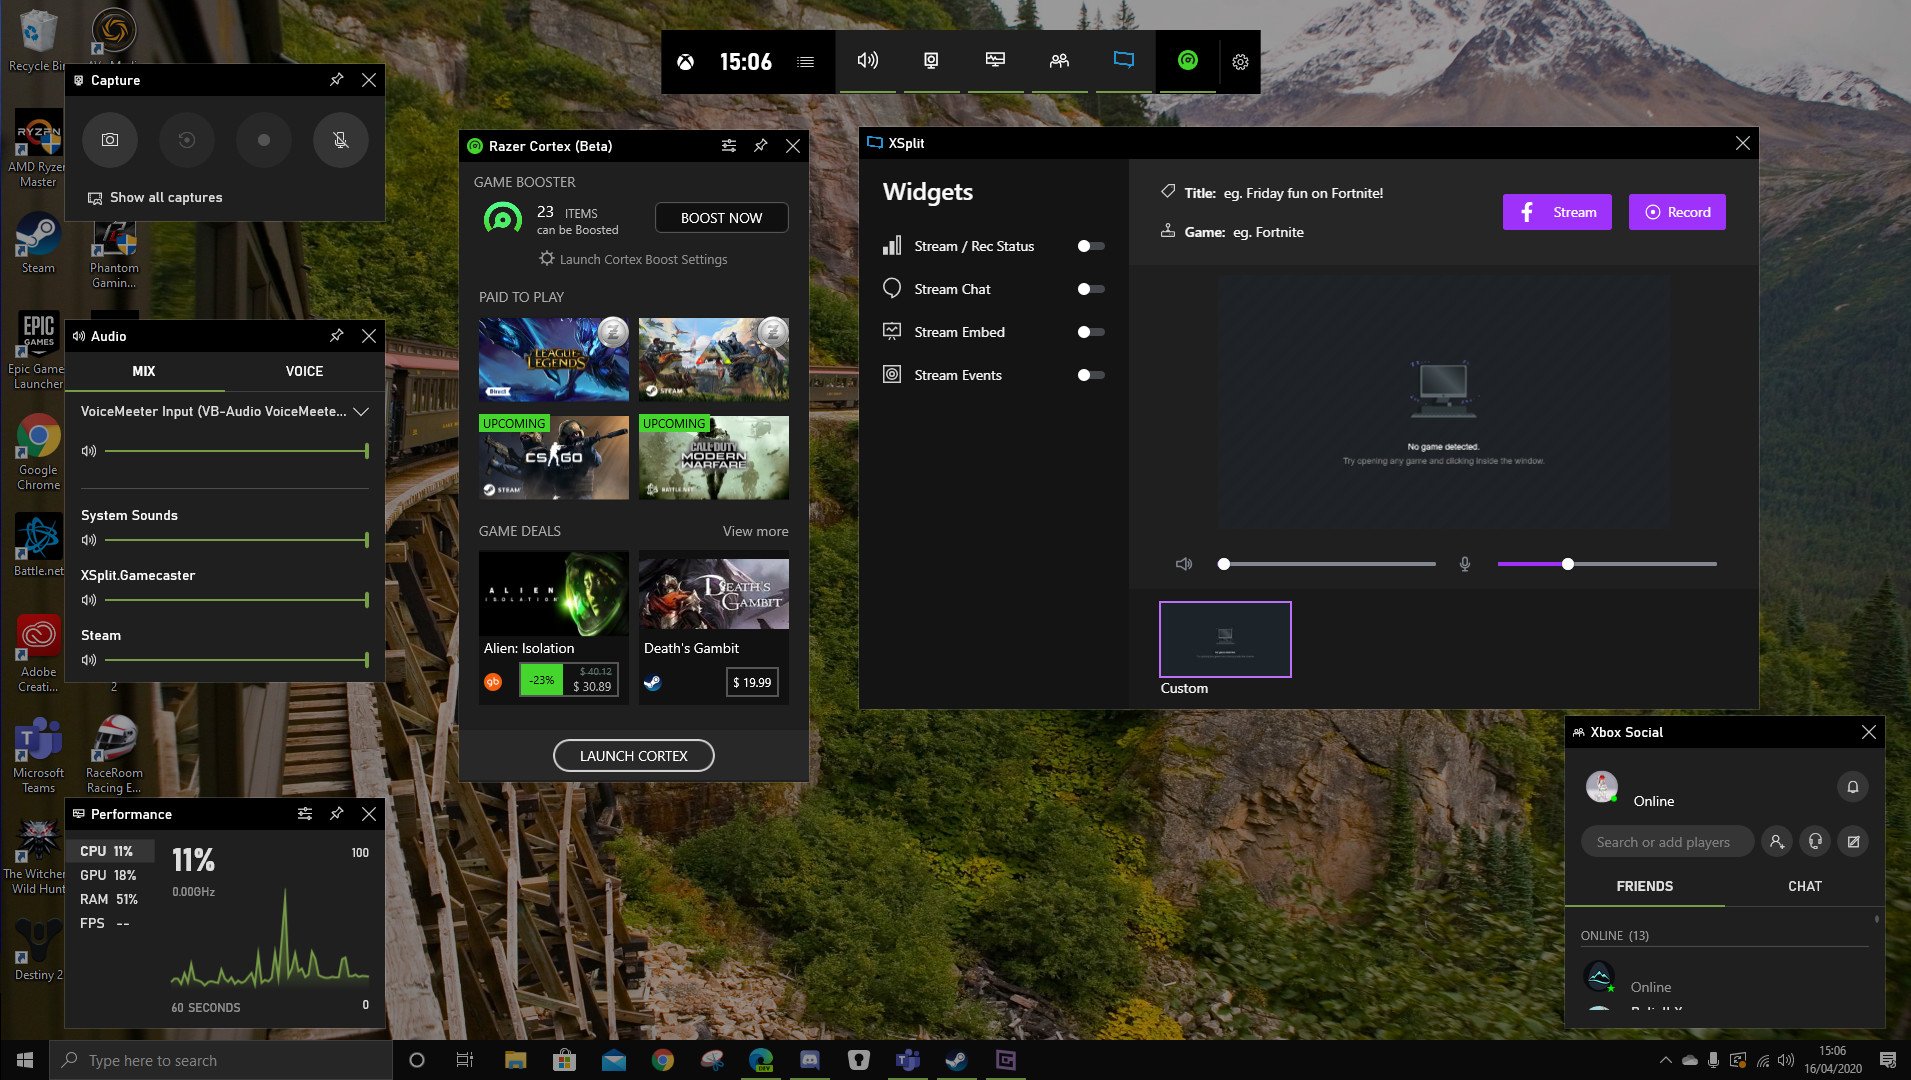 One Game Launcher with Xbox Game Bar makes for a pretty cozy